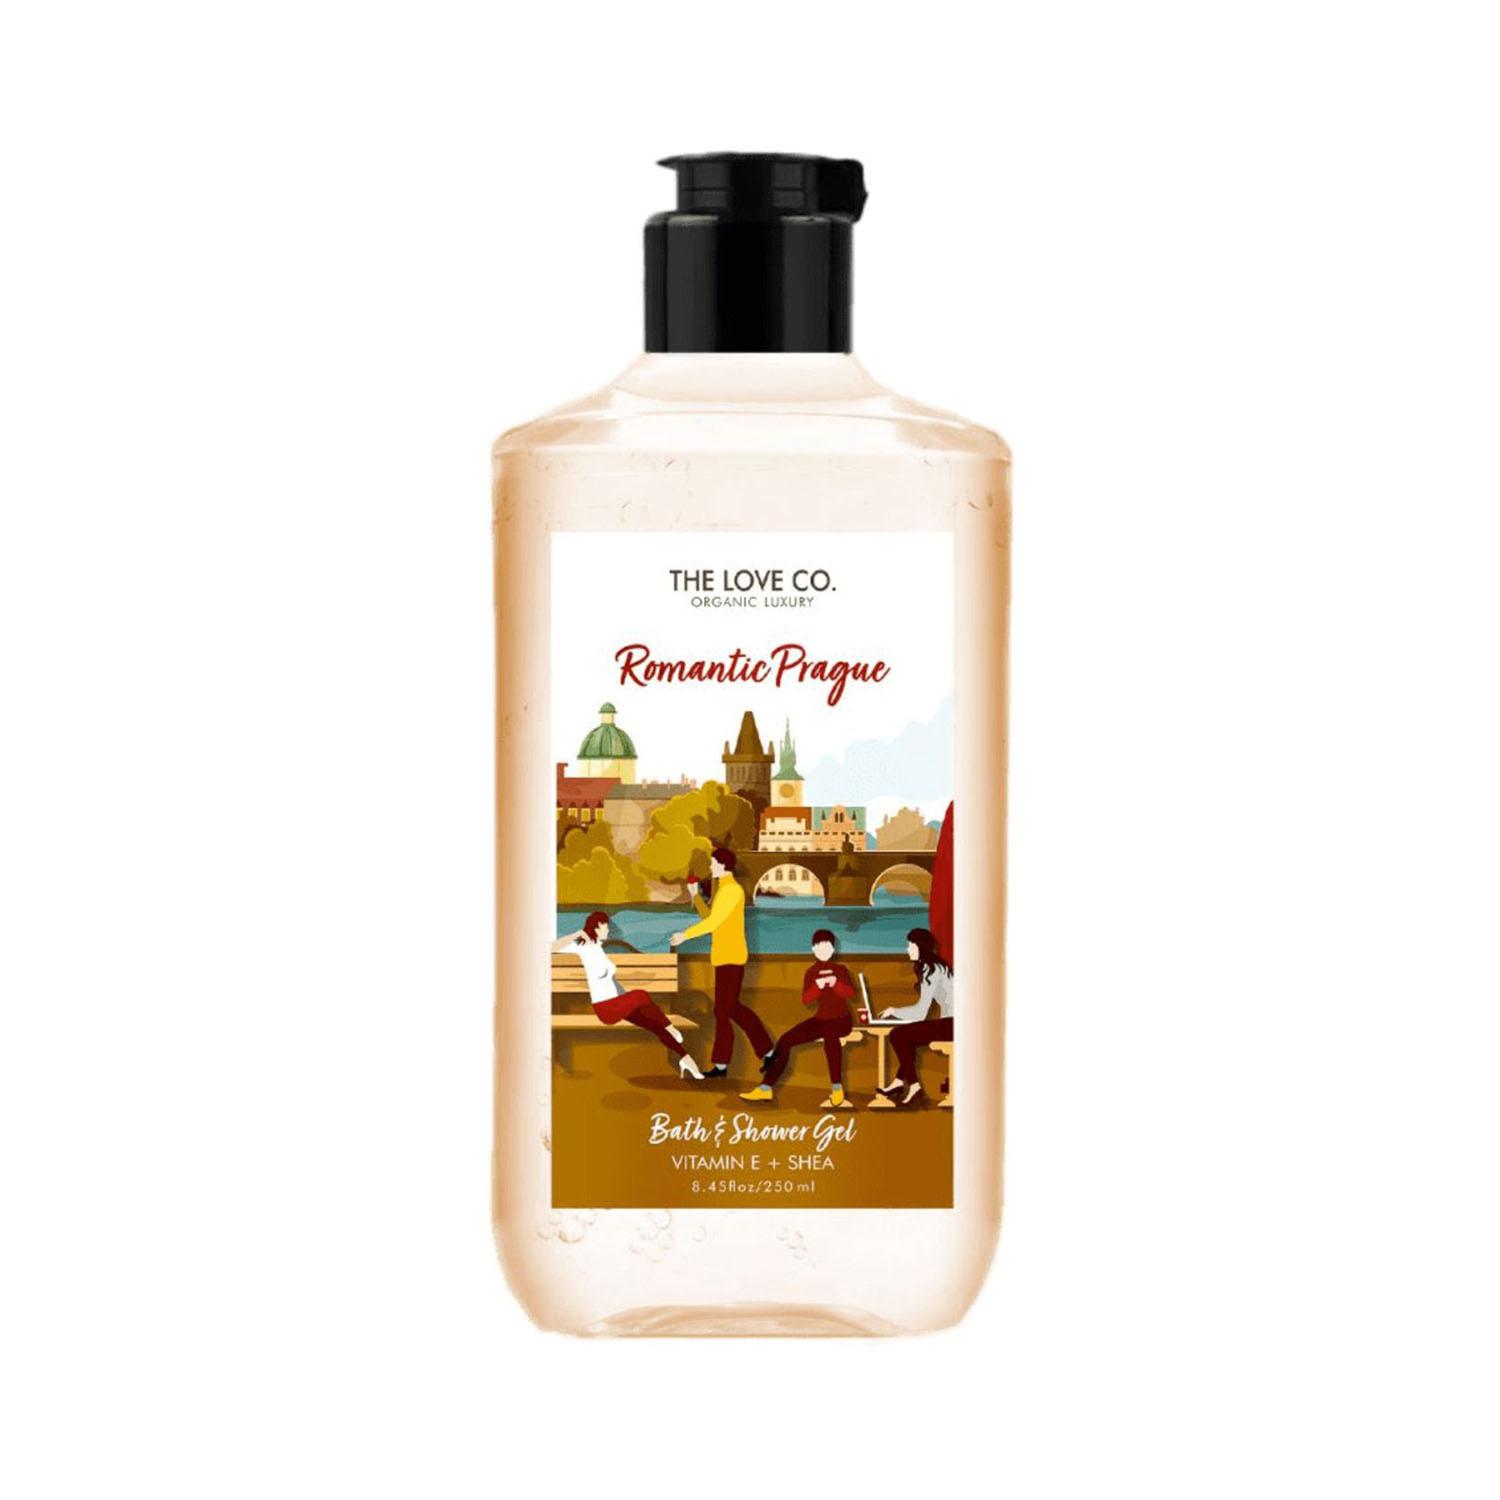 THE LOVE CO. | THE LOVE CO. Romantic Prague Body and Shower Gel (250ml)